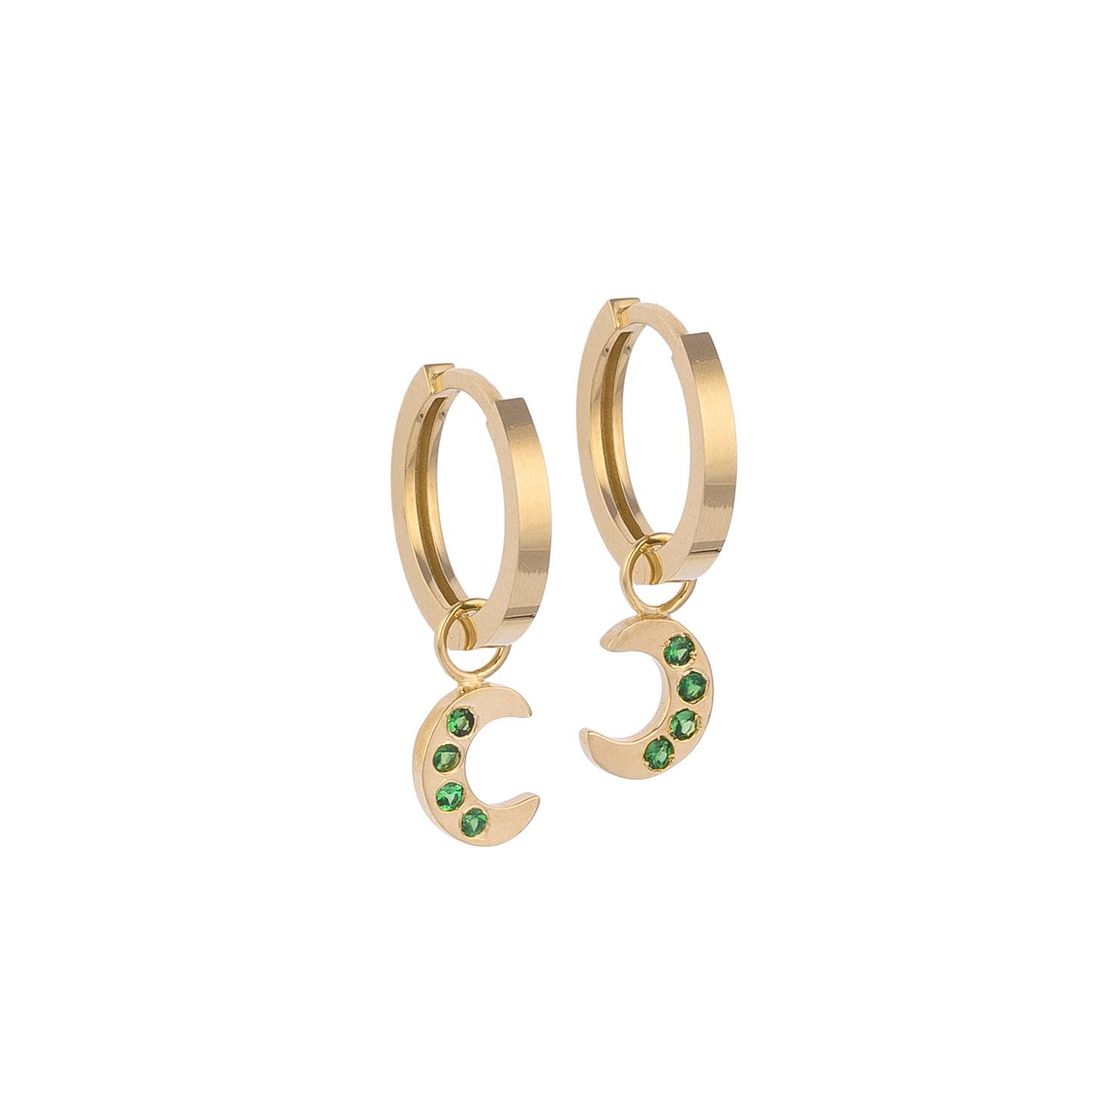 Moon-shaped Gold Earring Charm with Emerald Stones